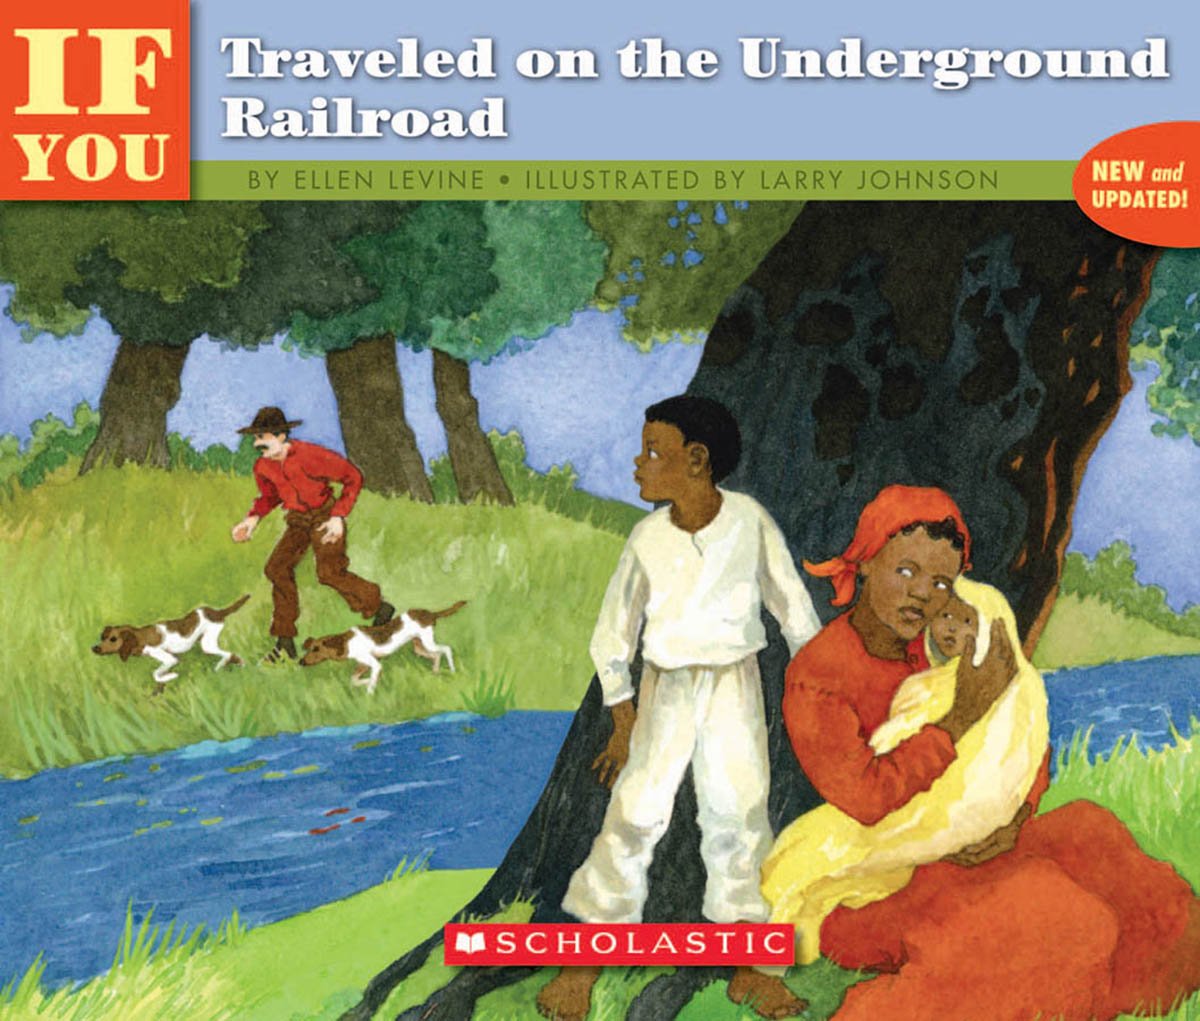 Book Cover . . . If You Traveled on the Underground Railroad